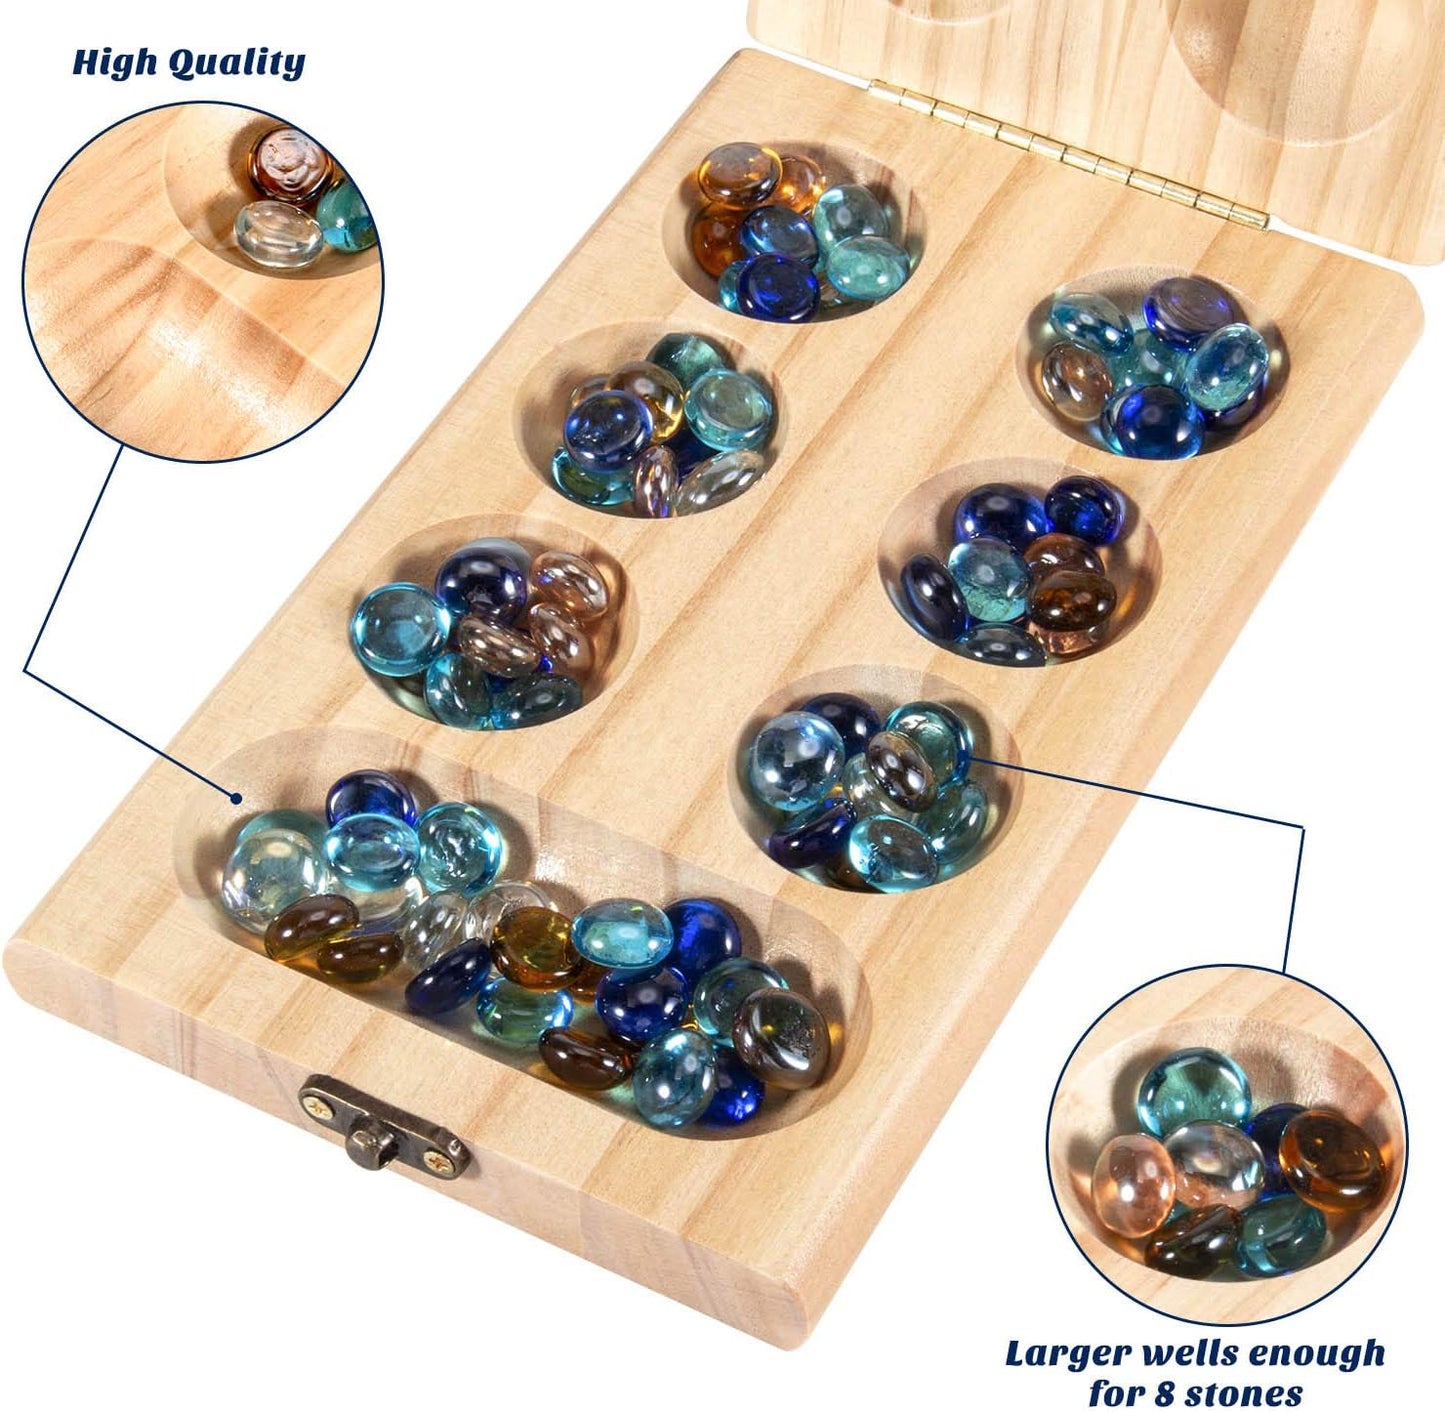 Wooden Mancala Board Game Set - Folding Board - 72+8 Bonus Multi Color Glass Stones - Gift Package - Mancale Instructions, Portable Travel Board Game for Kids and Adults